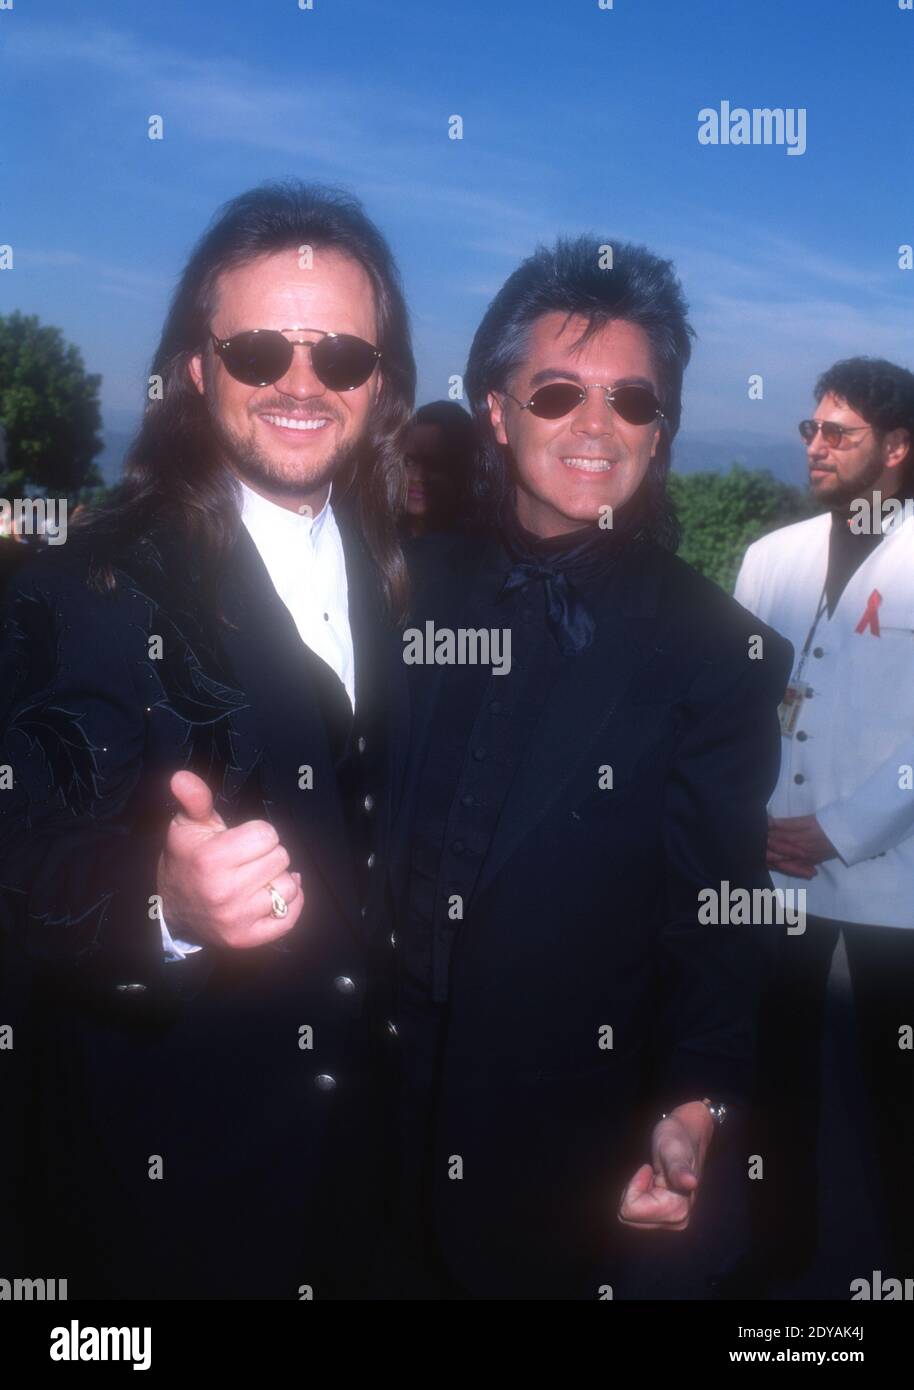 Universal City, California, USA 24th April 1996 Singer Travis Tritt and singer Marty Stuart attend 31st Annual Academy of Country Music Awards at Gibson Amphitheatre on April 24, 1996 in Universal City, California, USA. Photo by Barry King Stock Photo